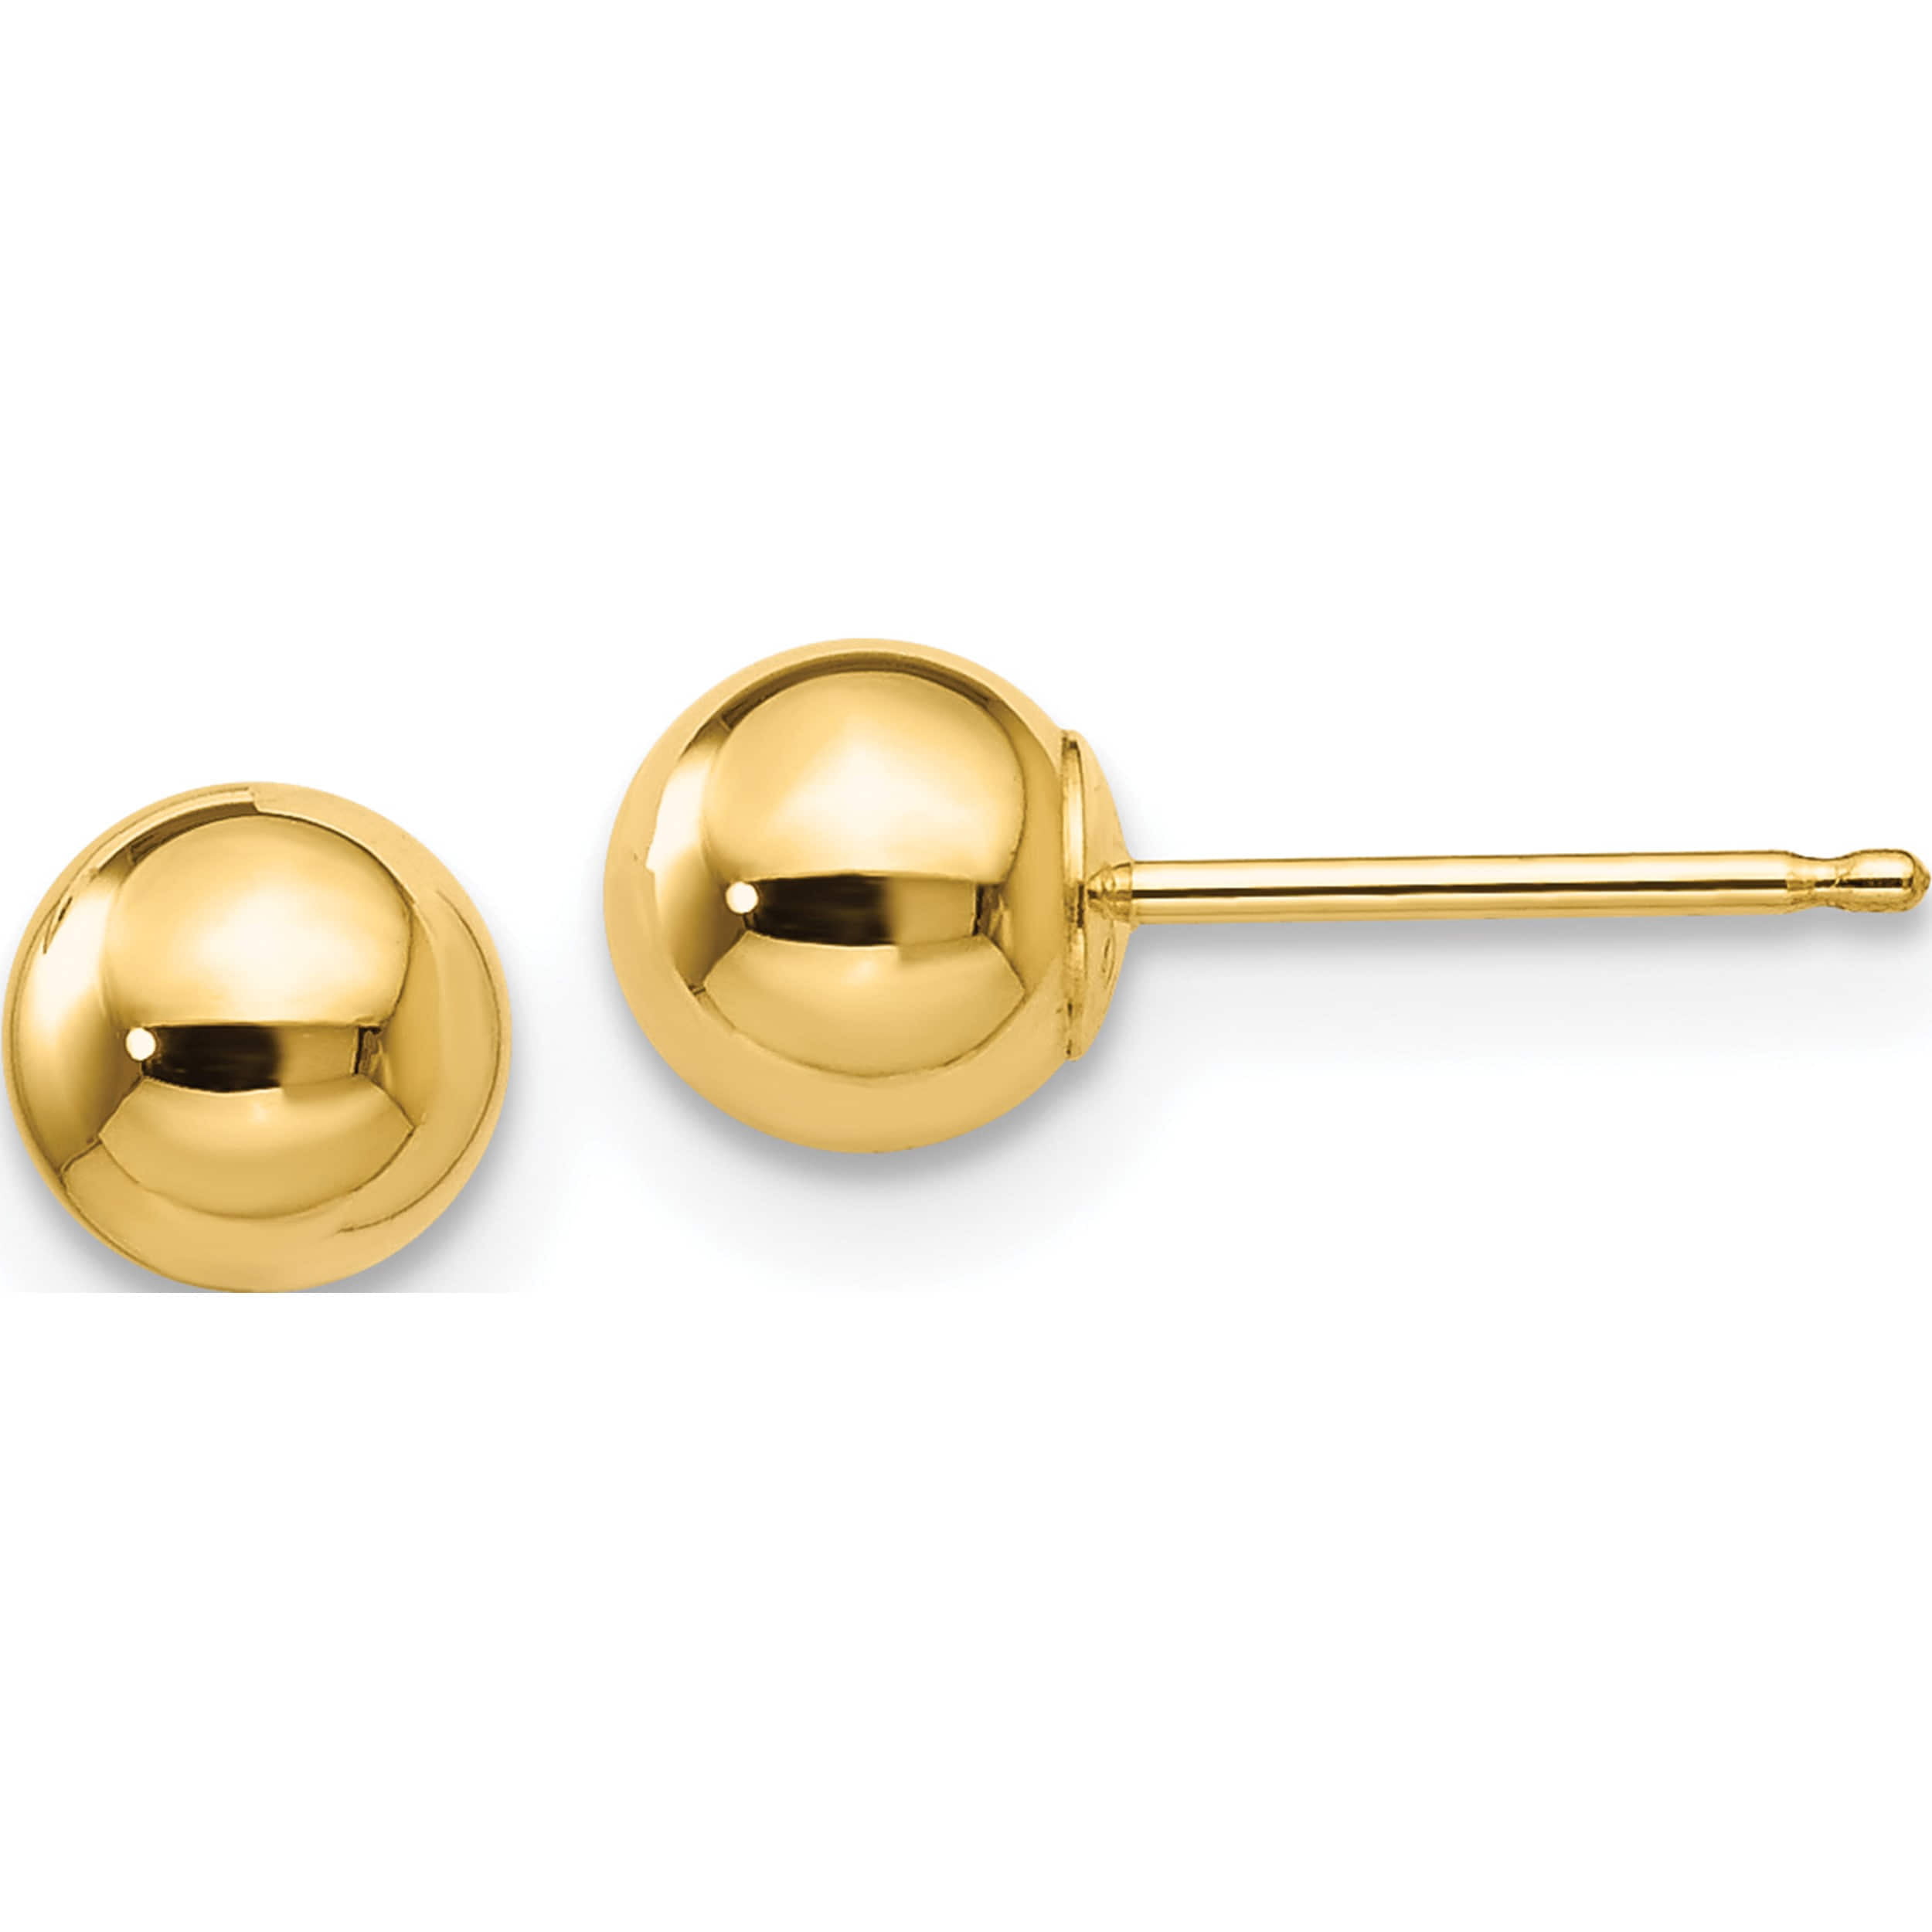 Genuine 14k Yellow Gold Polished 5mm Ball Post Earrings 5 x5mm